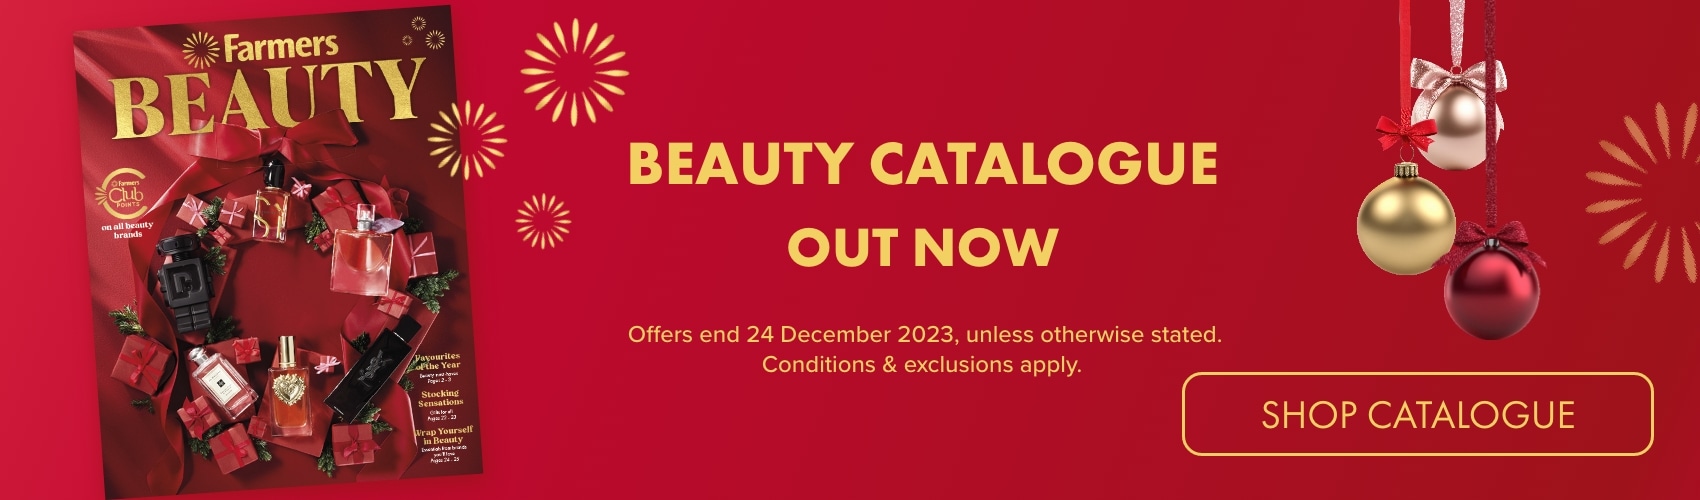 Beauty Catalogue OUT NOW 